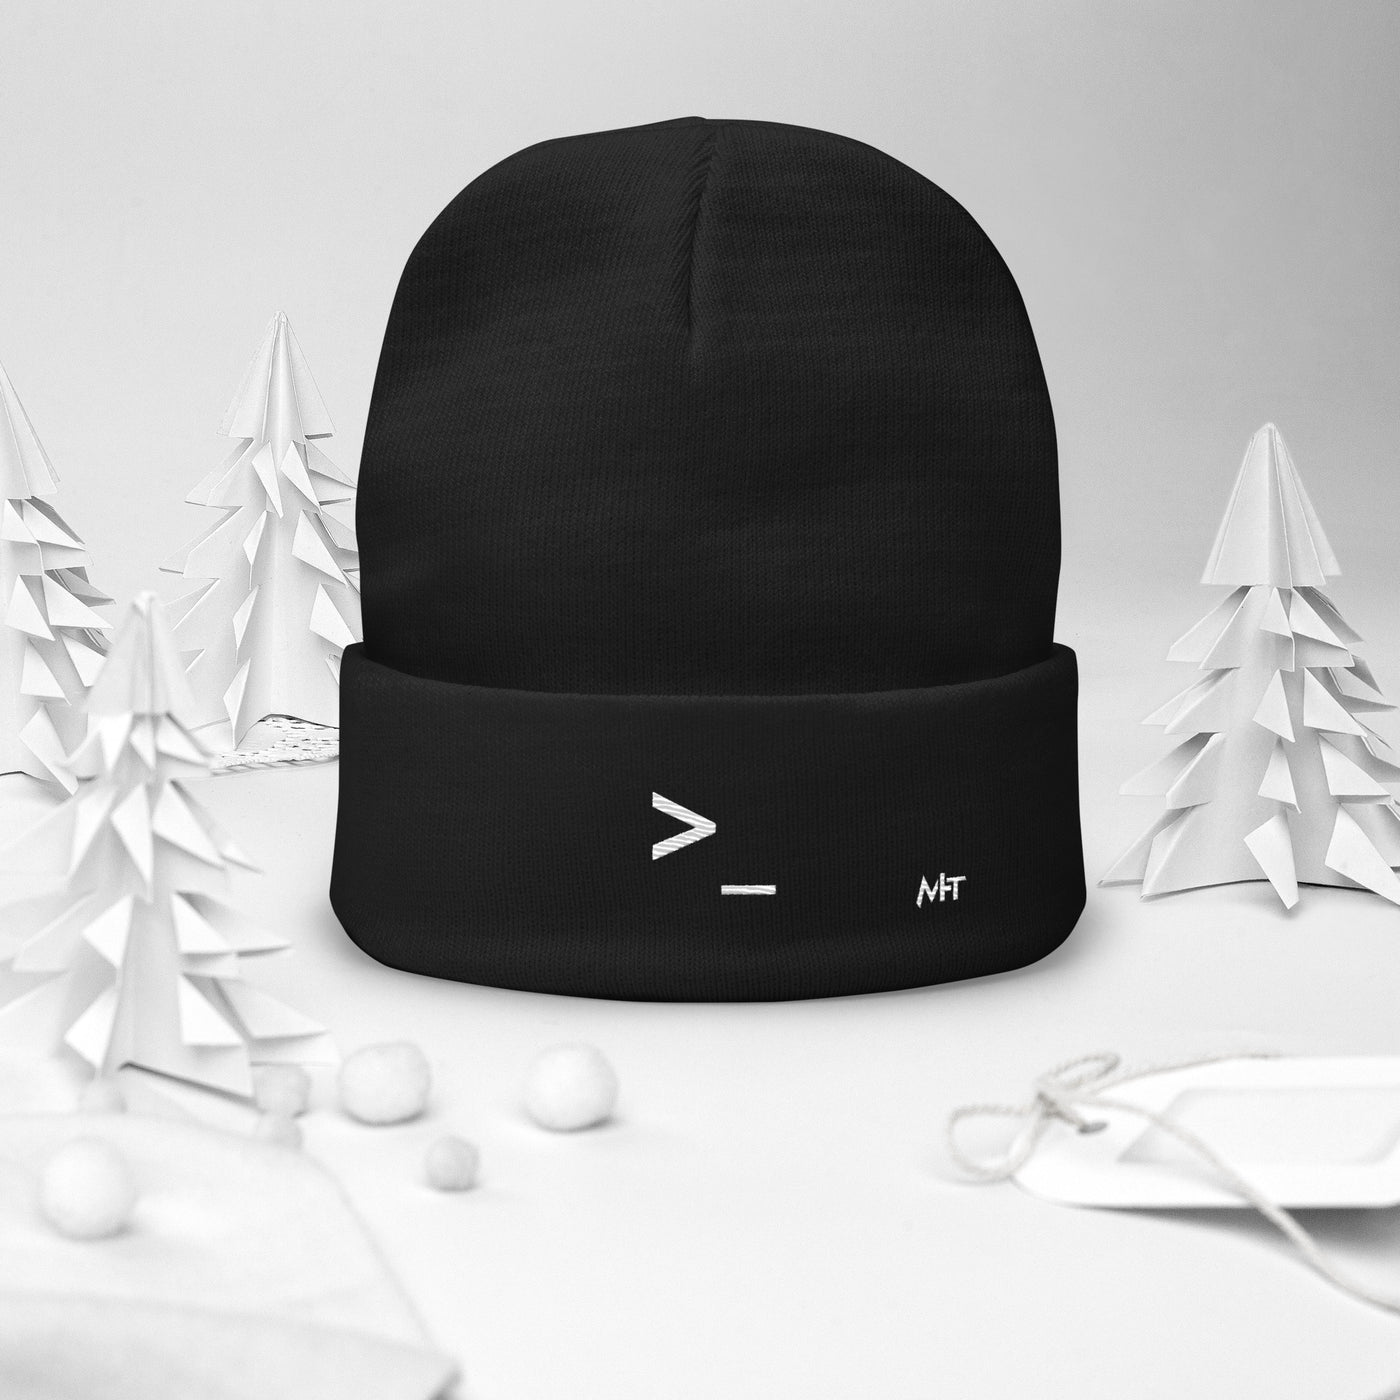 CLI - Embroidered Beanie